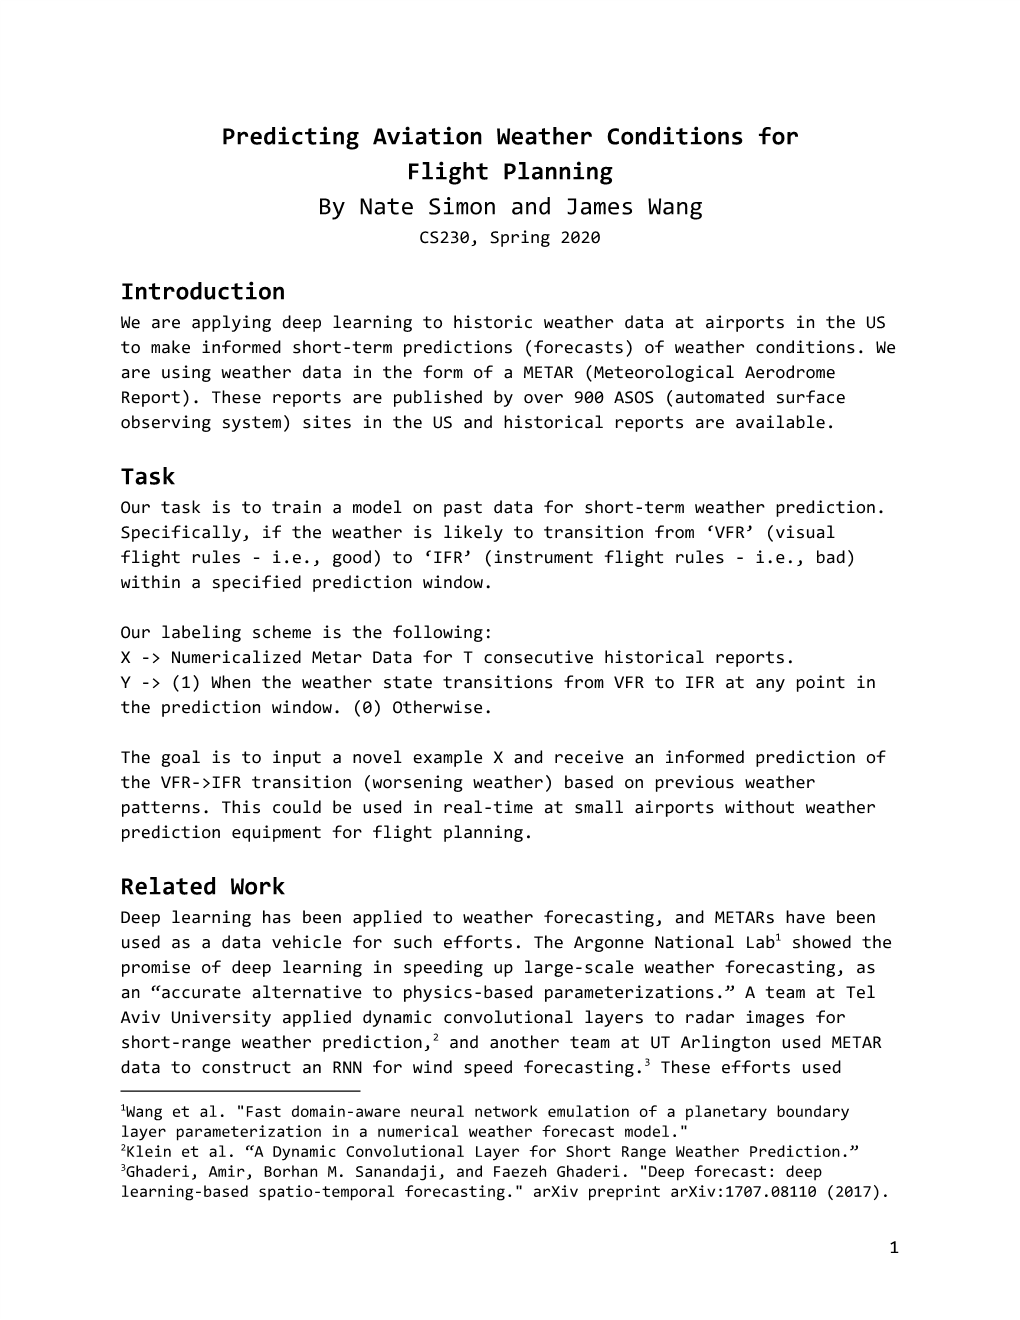 Predicting Aviation Weather Conditions for Flight Planning by Nate Simon and James Wang CS230, Spring 2020